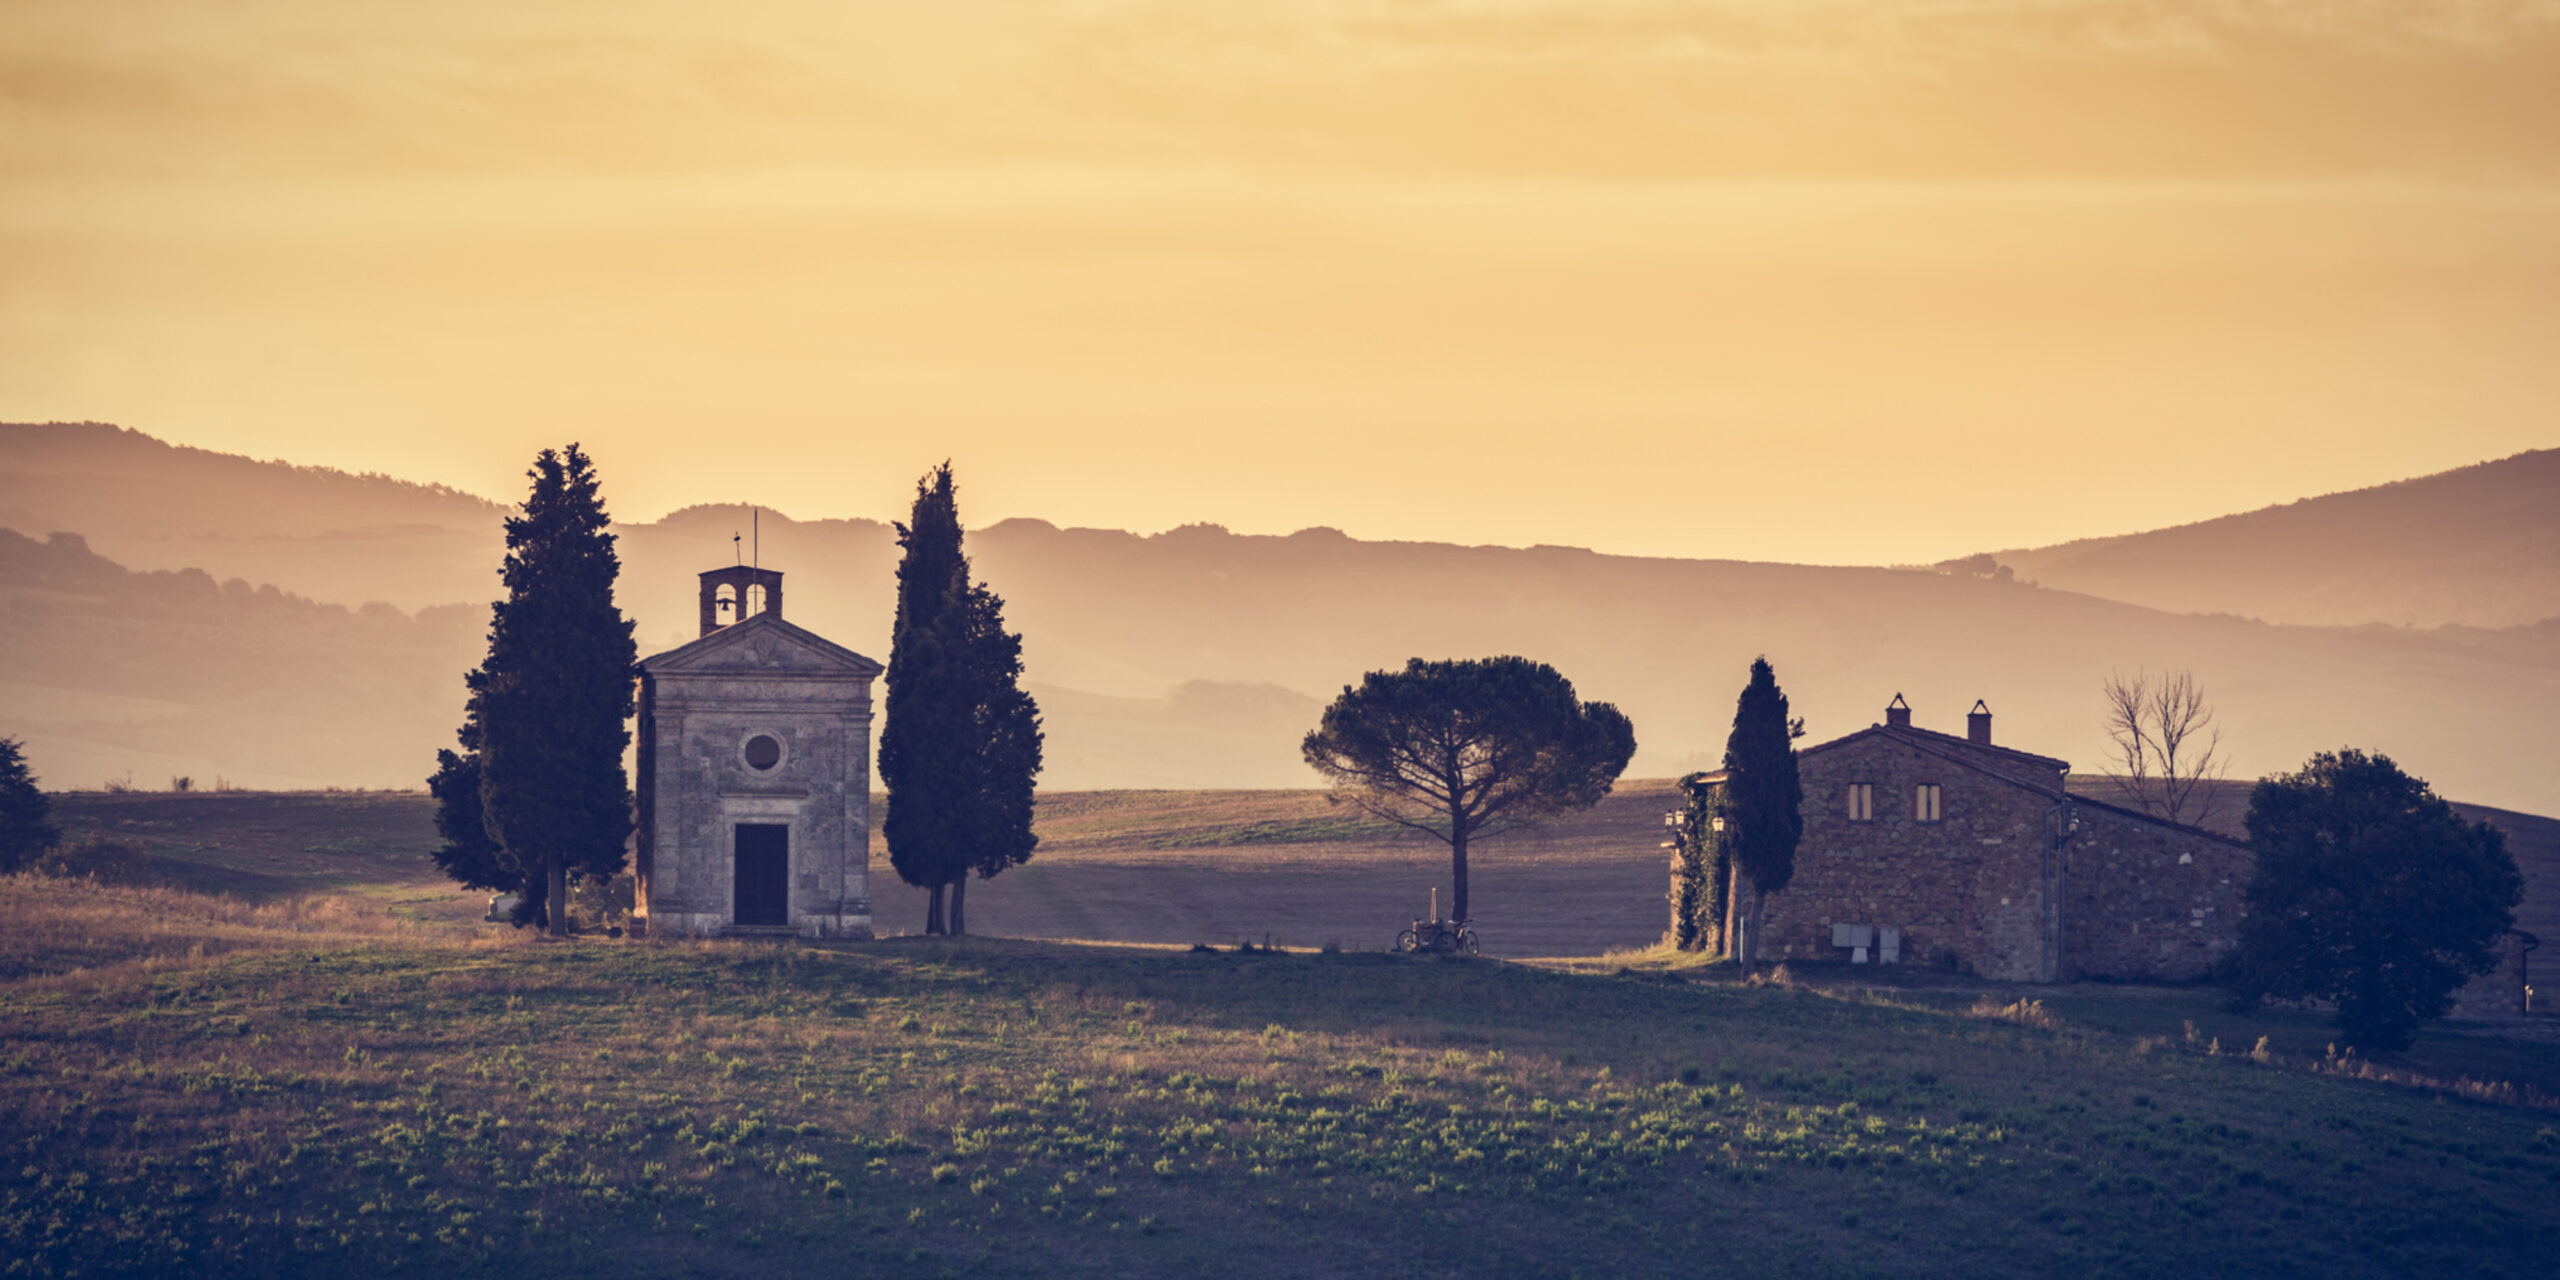 Off the Beaten Path: Undiscovered Towns and Villages of Rural Tuscany